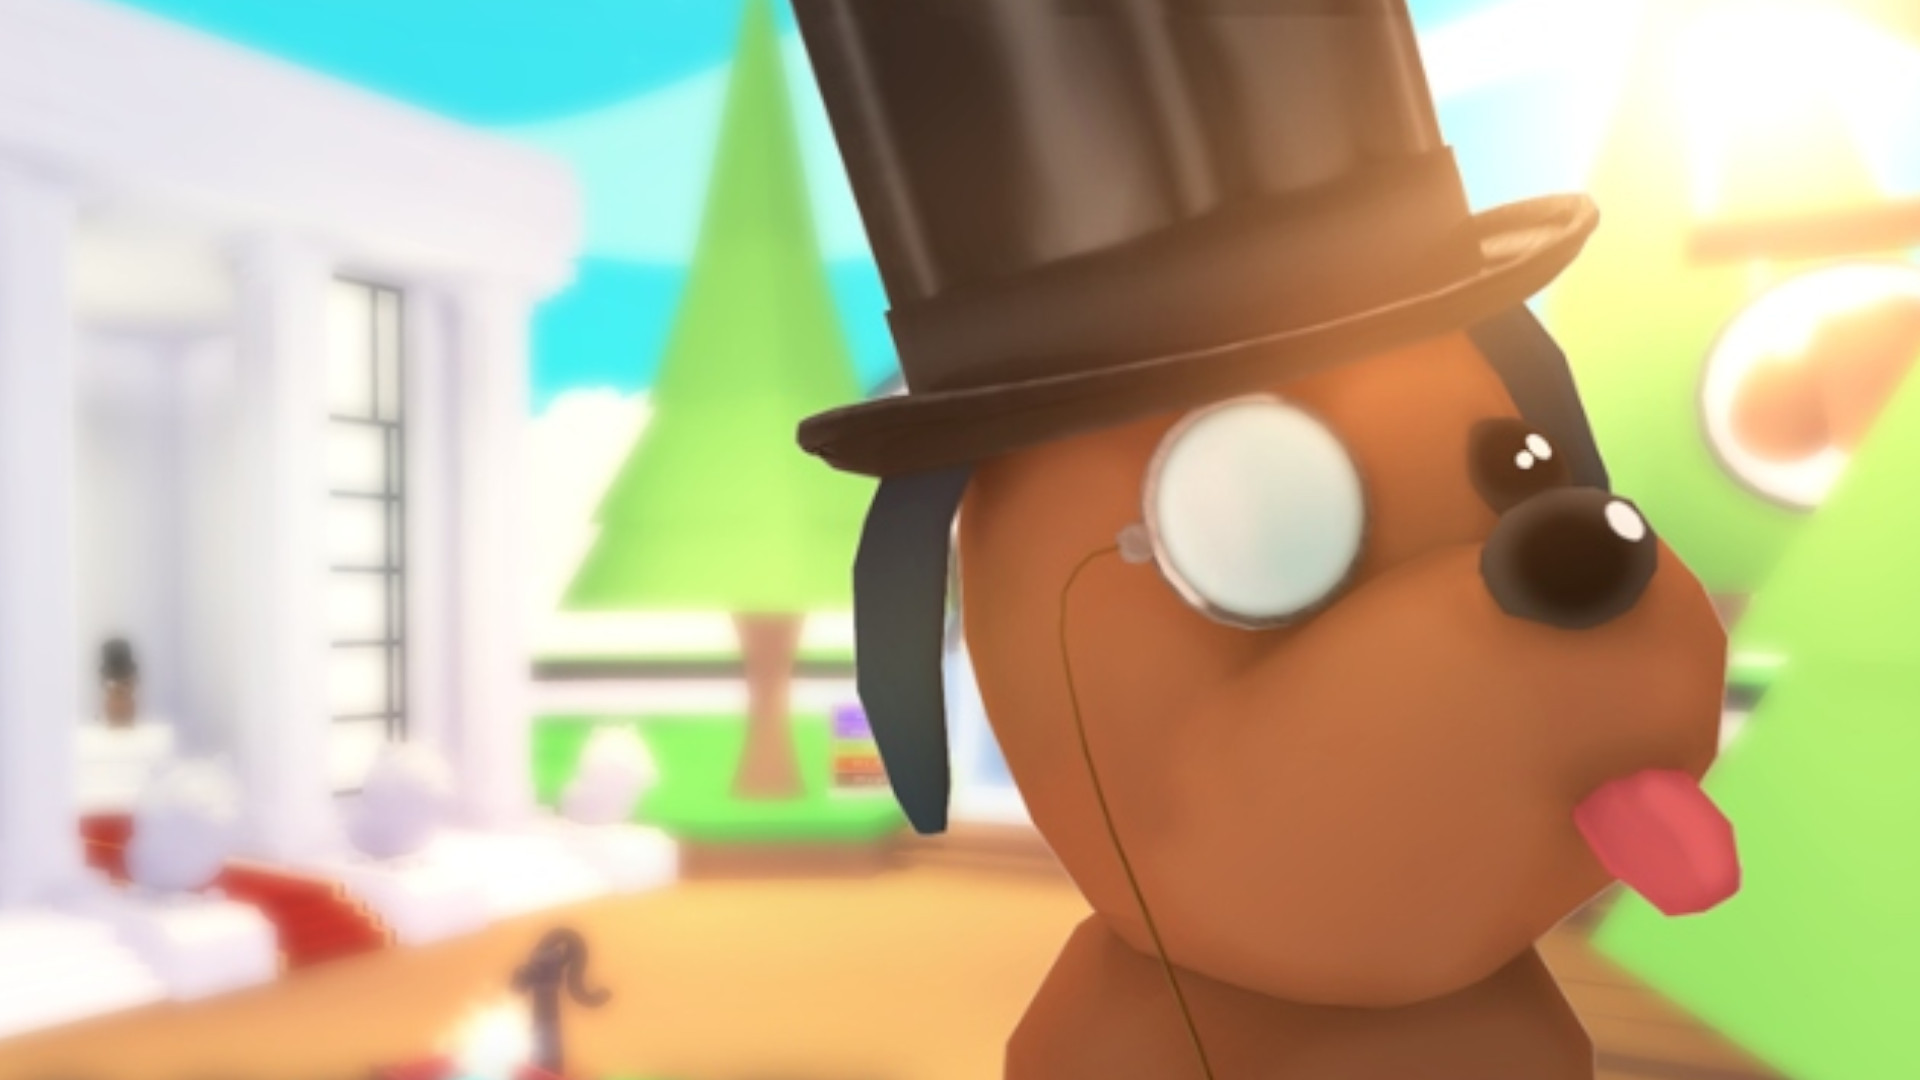 Game Review: Adopt Me!. With a cheerful and delightful…, by devmarissa, RobloxRadar